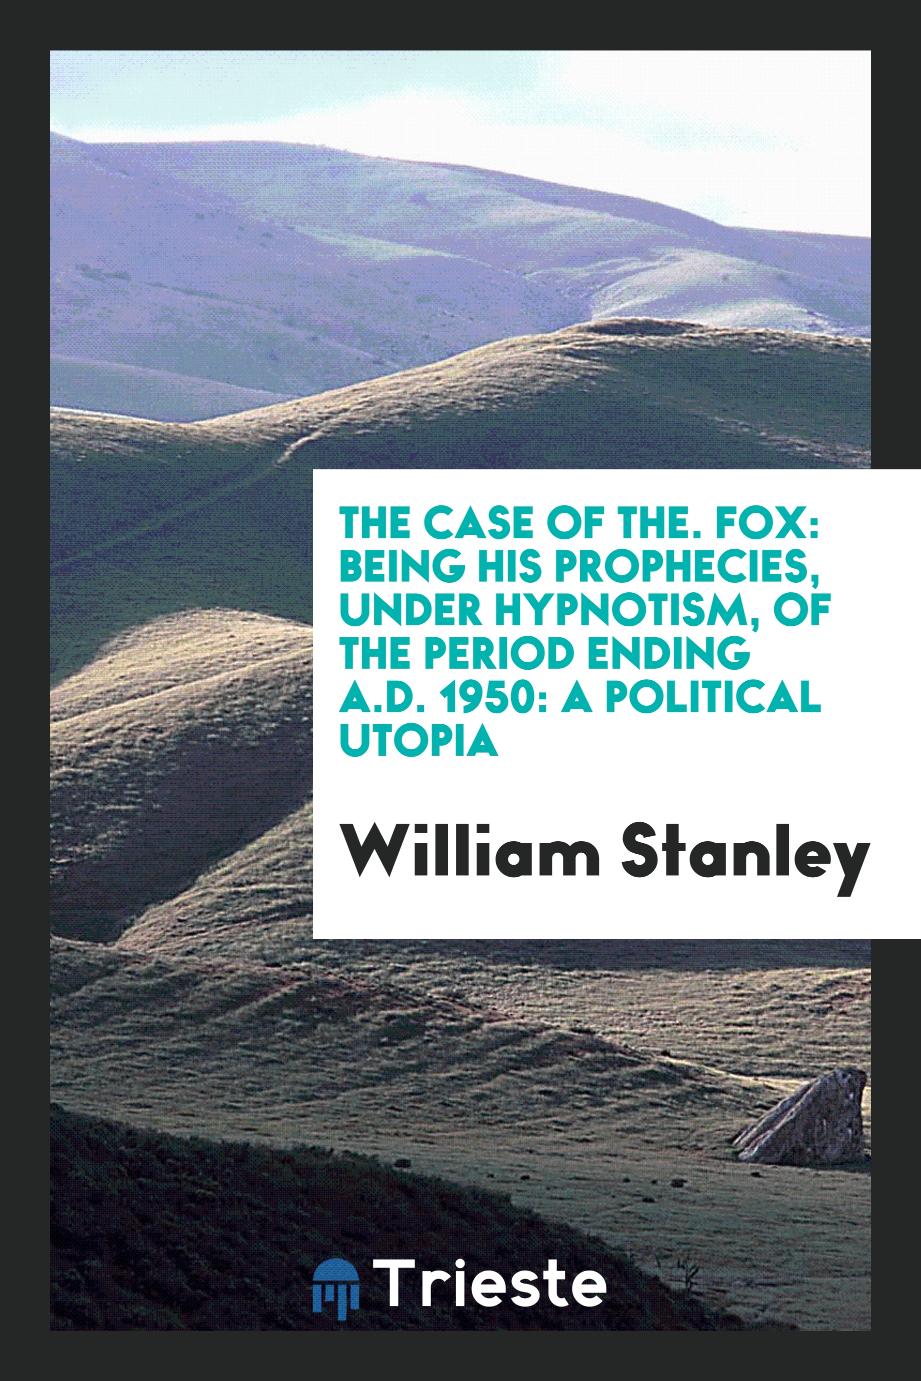 The case of The. Fox: being his prophecies, under hypnotism, of the period ending A.D. 1950: a political utopia